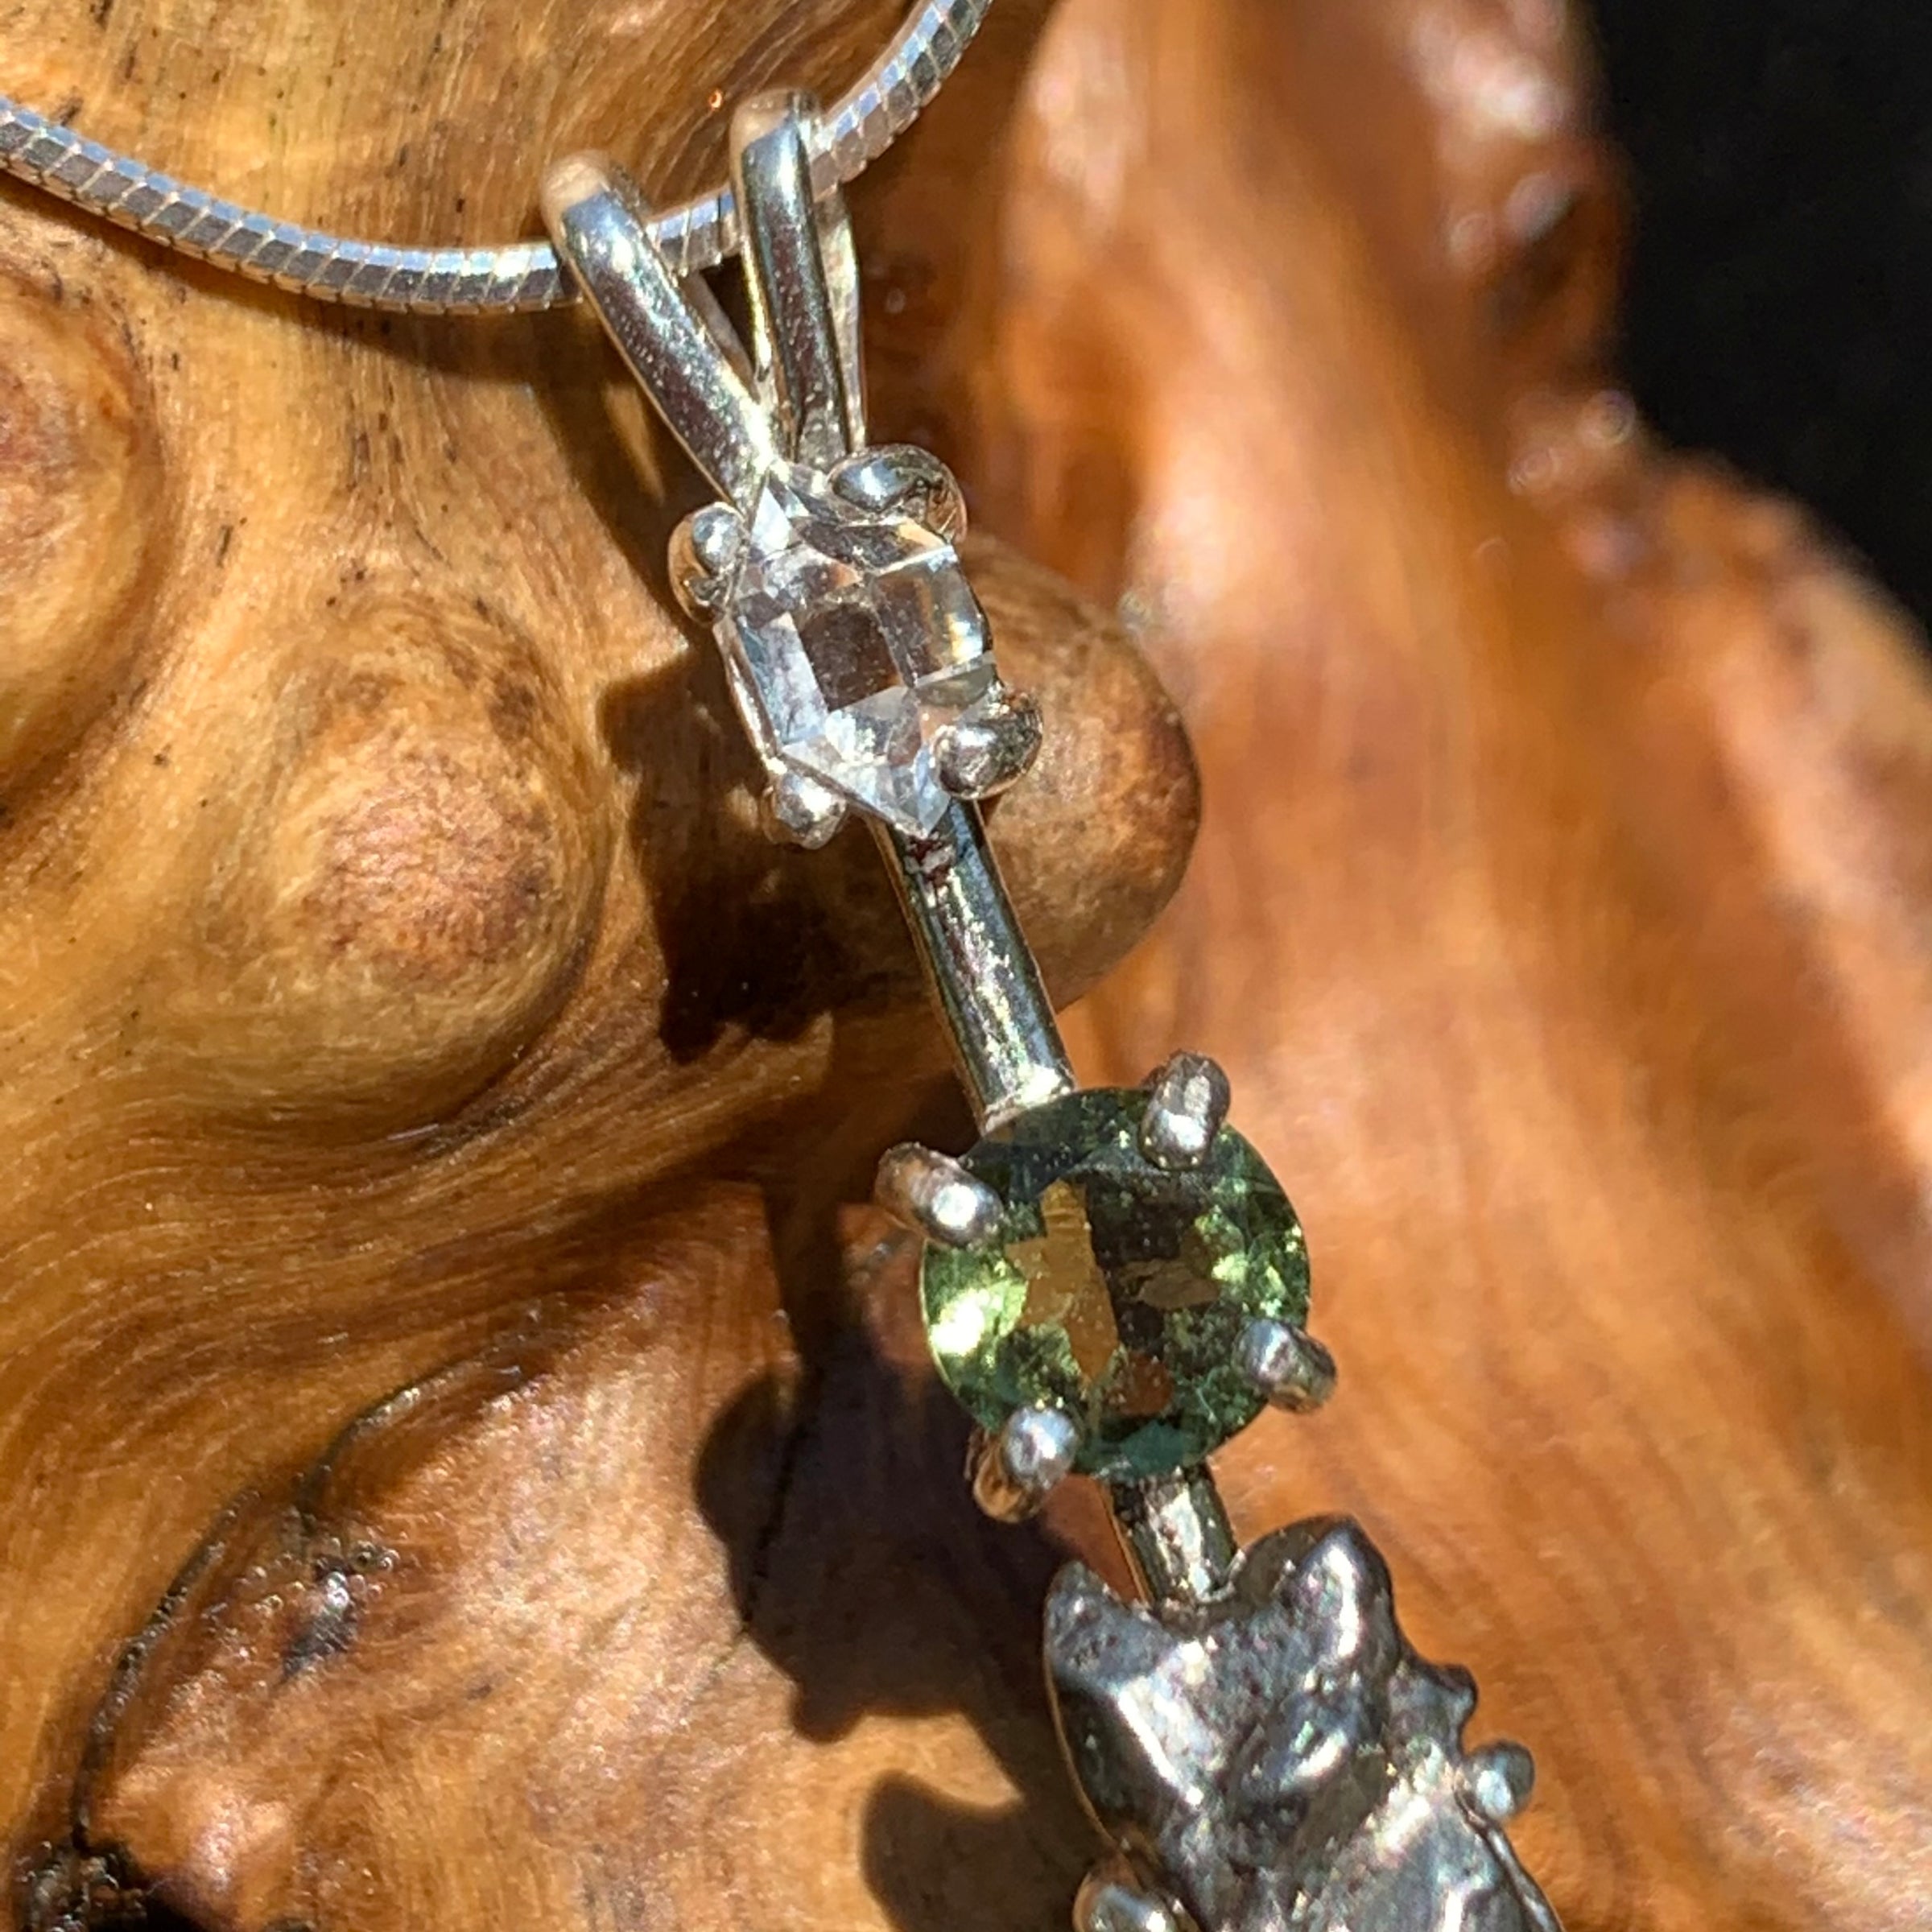 close up view of sterling silver pendant necklace with Herkimer diamond, moldavite, and campo del cielo meteorite sitting on driftwood for display